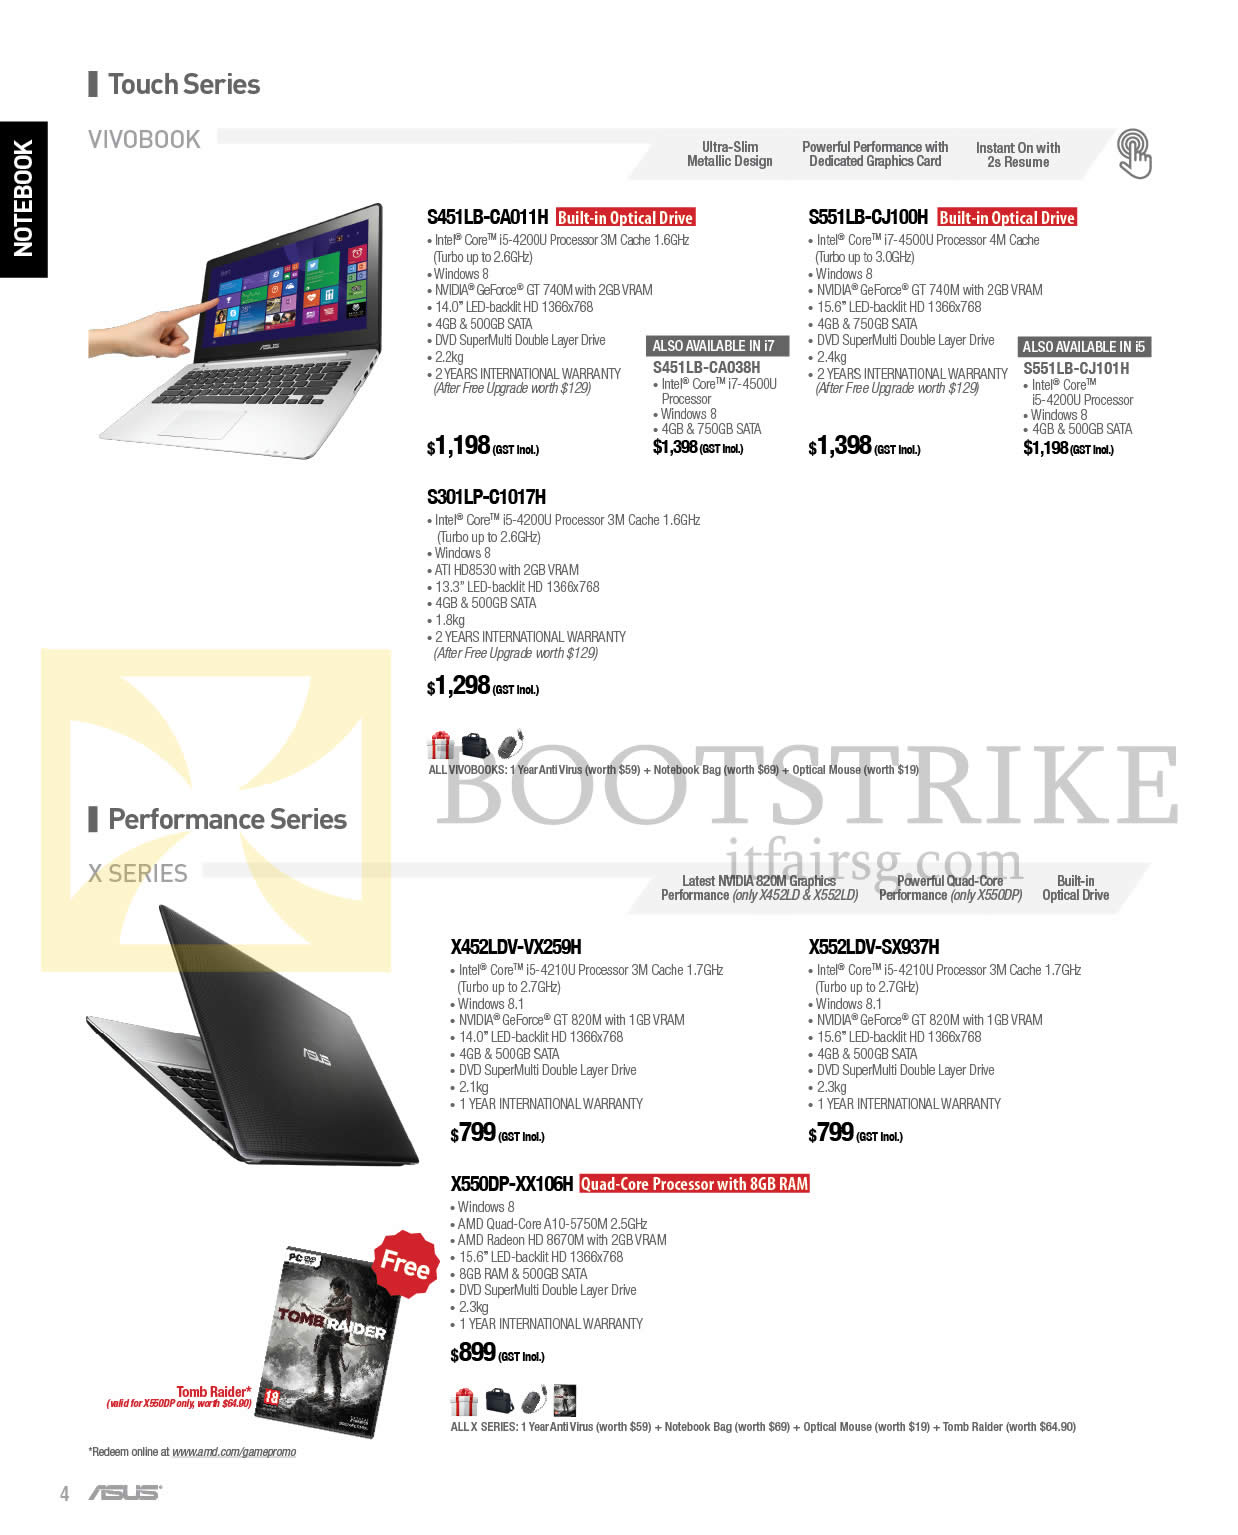 COMEX 2014 price list image brochure of ASUS Notebooks Vivobook Touch, Performance X Series S451LB-CA011H, CA038H, S551LB-CJ100H, CJ101H, S301LP-C1017H, X452LDV-VX259H, X552LDV-SX937H, X550DP-XX106H